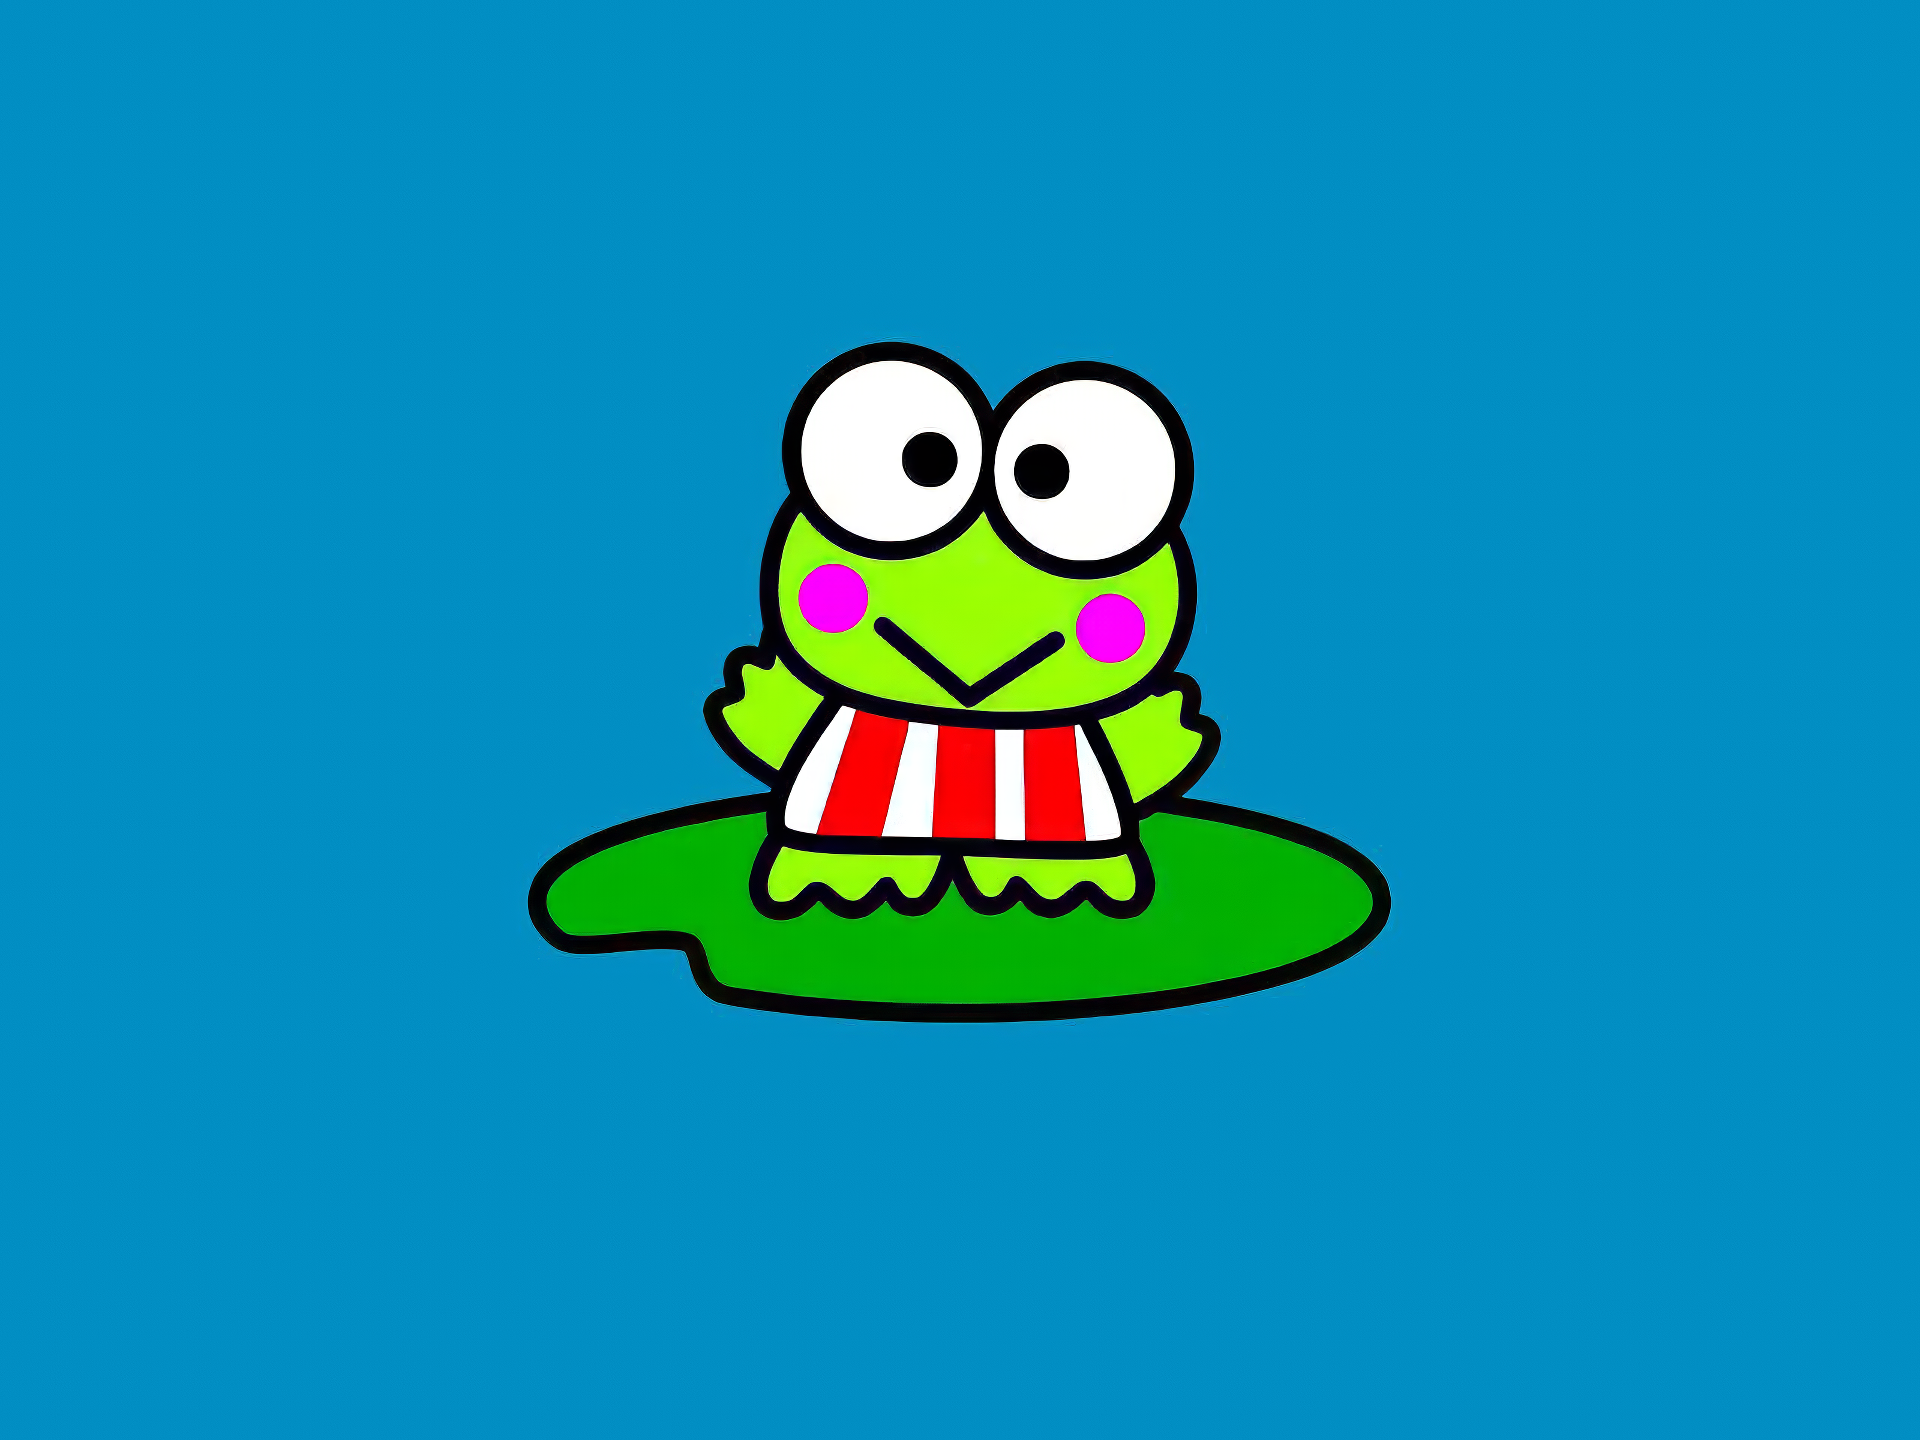 Cute Cartoon Frog, Coloring Page, Isolated - Vector Image